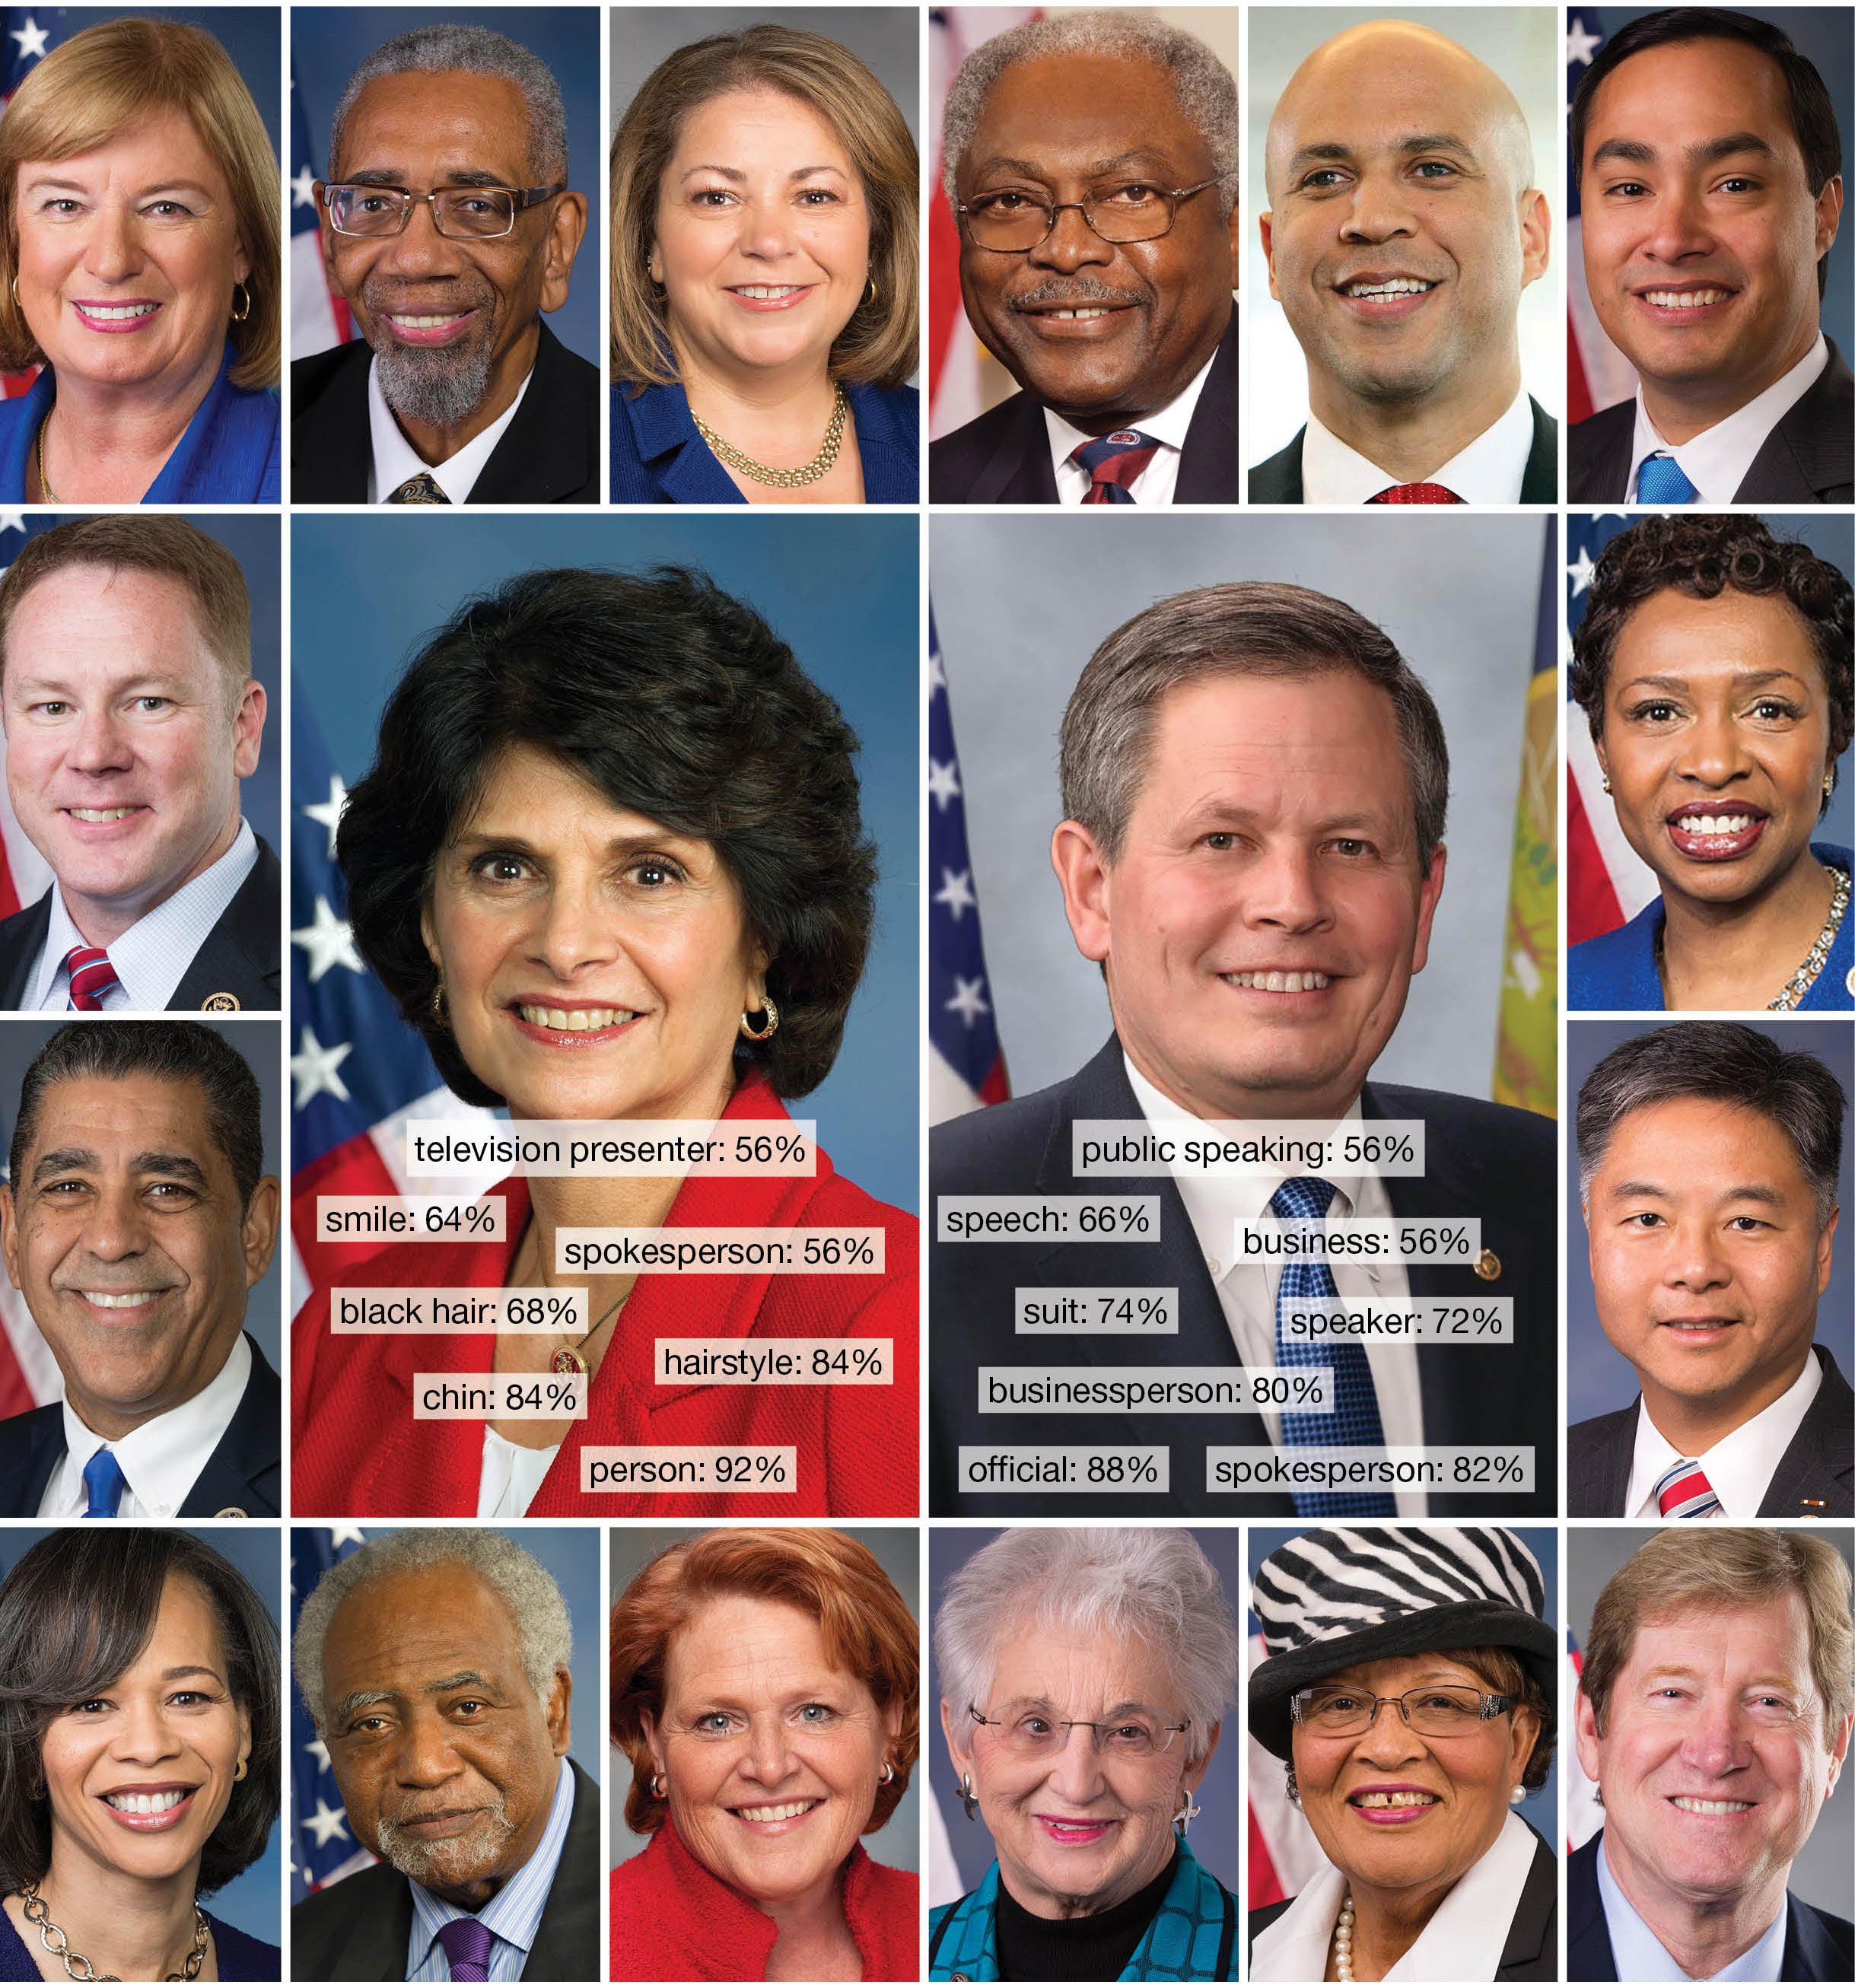 The faces of different politicians of different genders and races. 